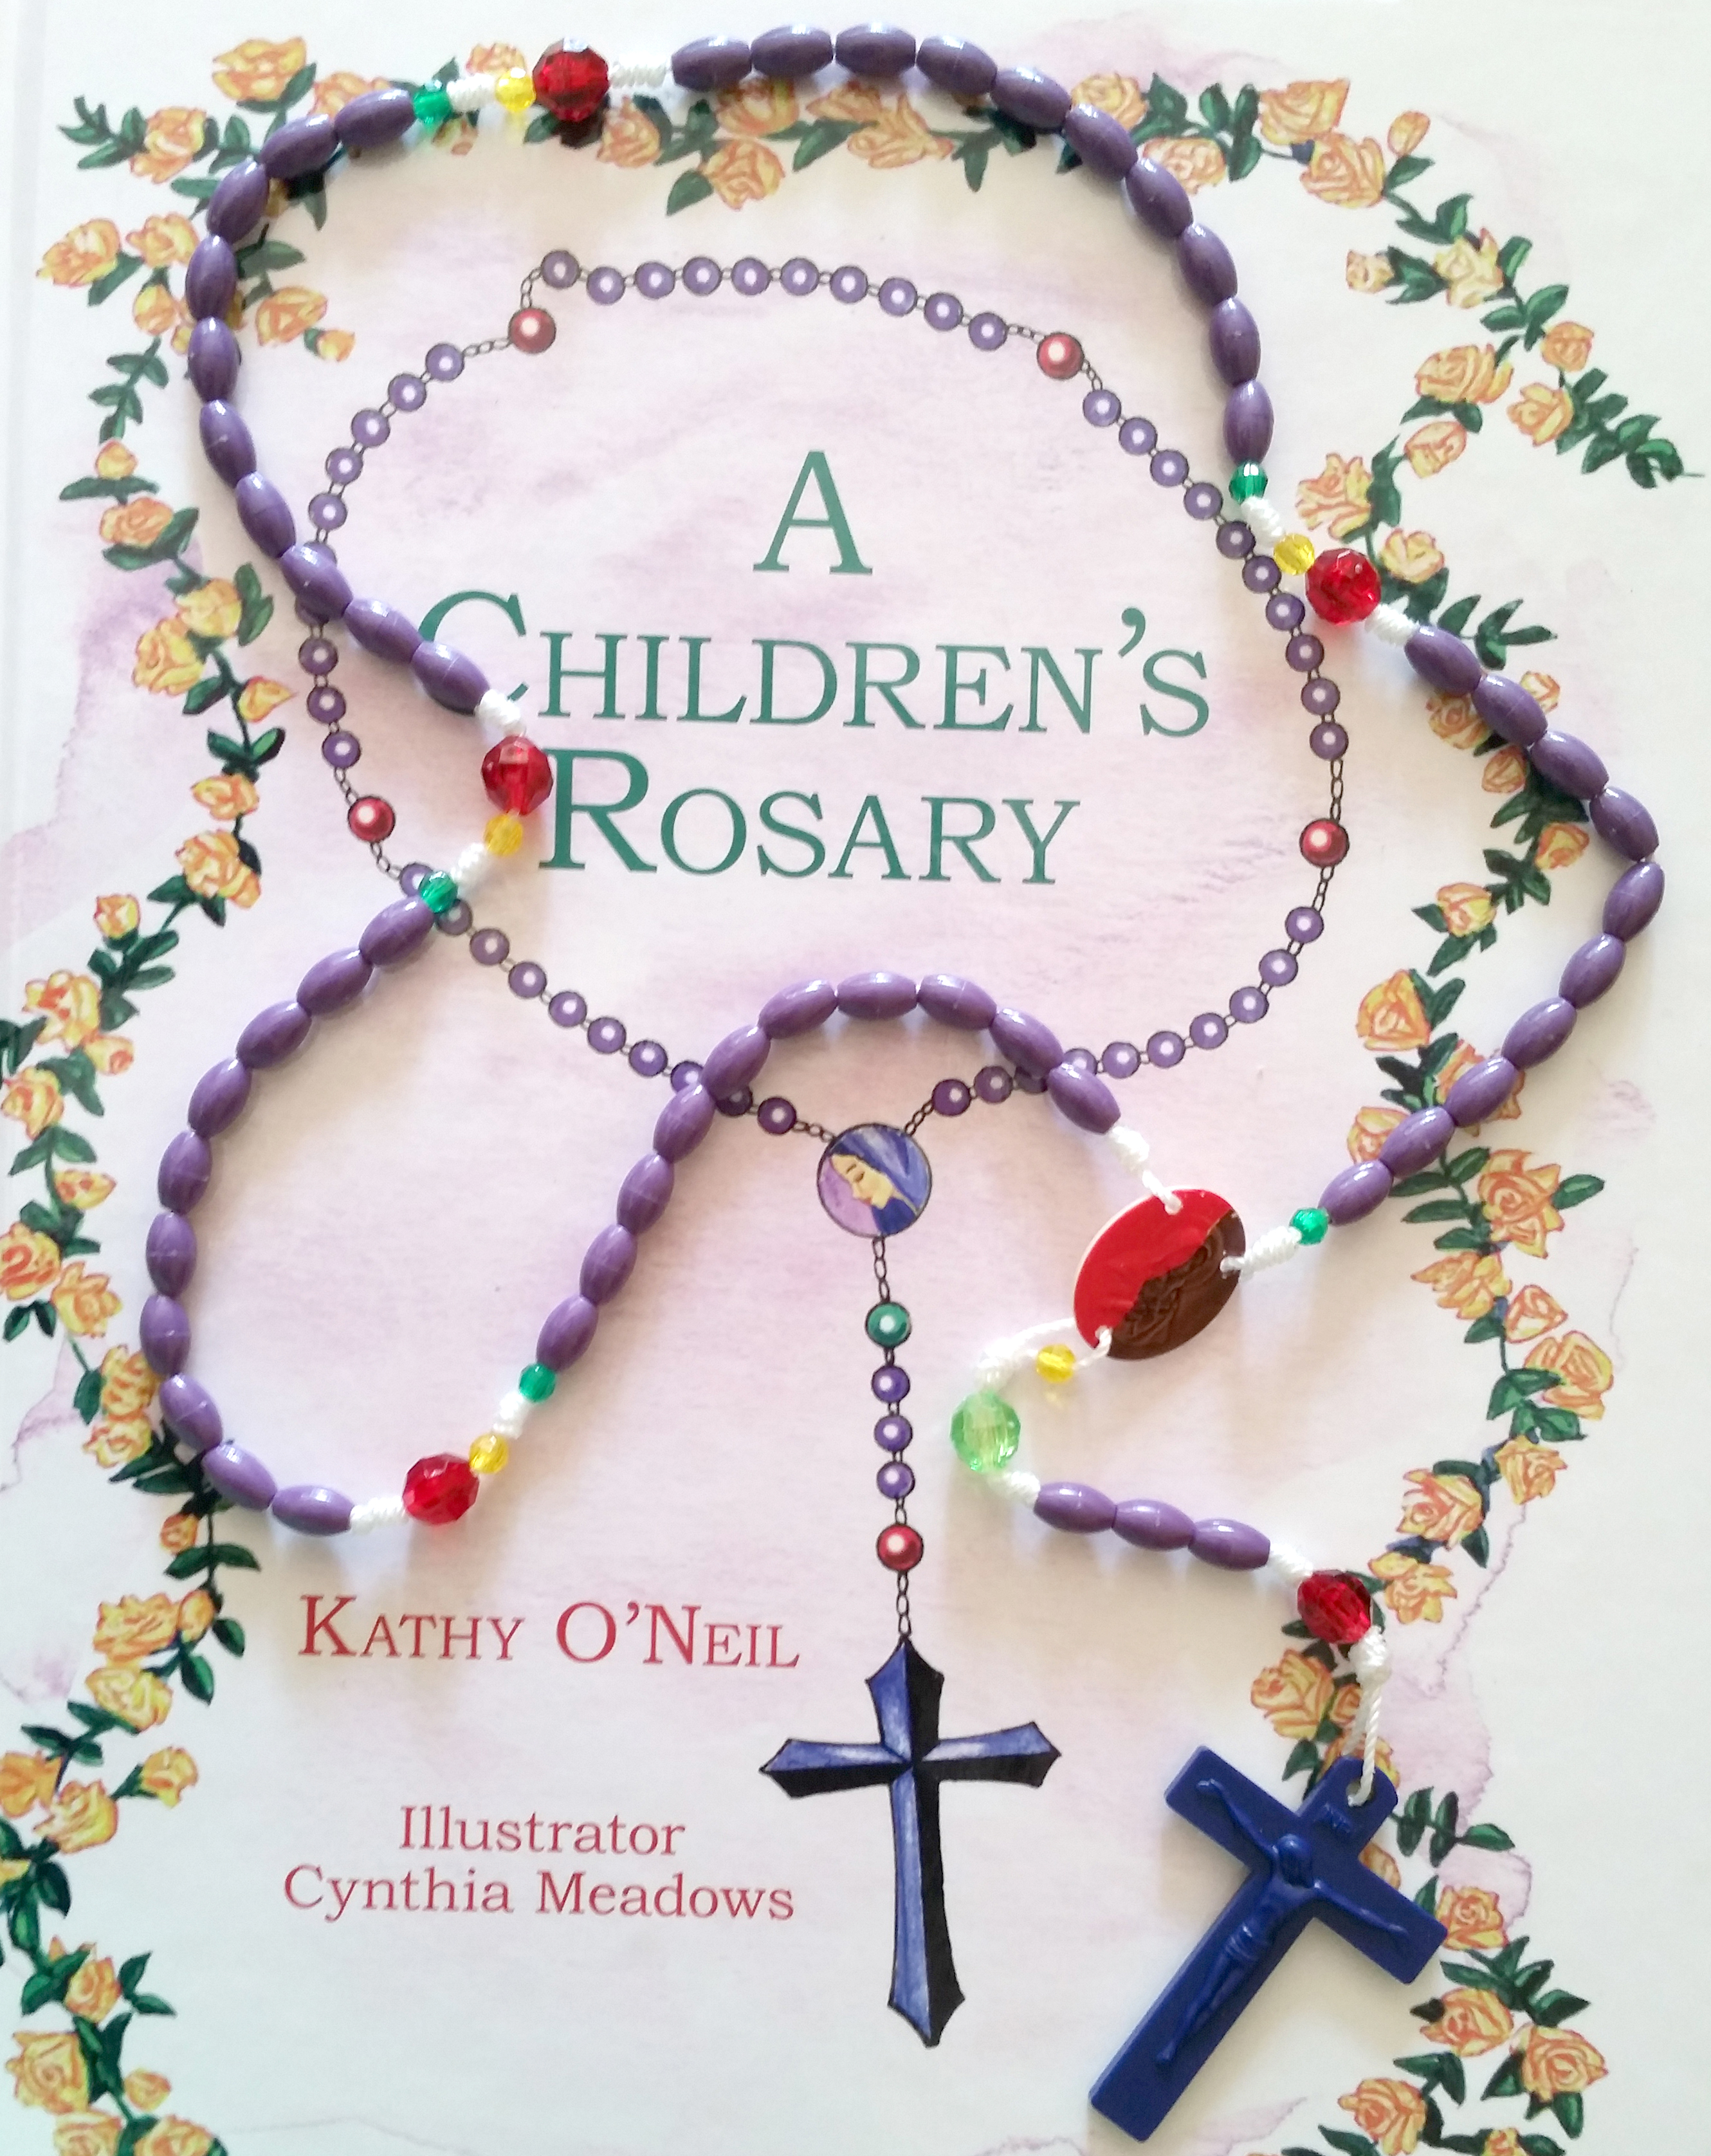 A Children's Rosary Book by Kathy O'Neil